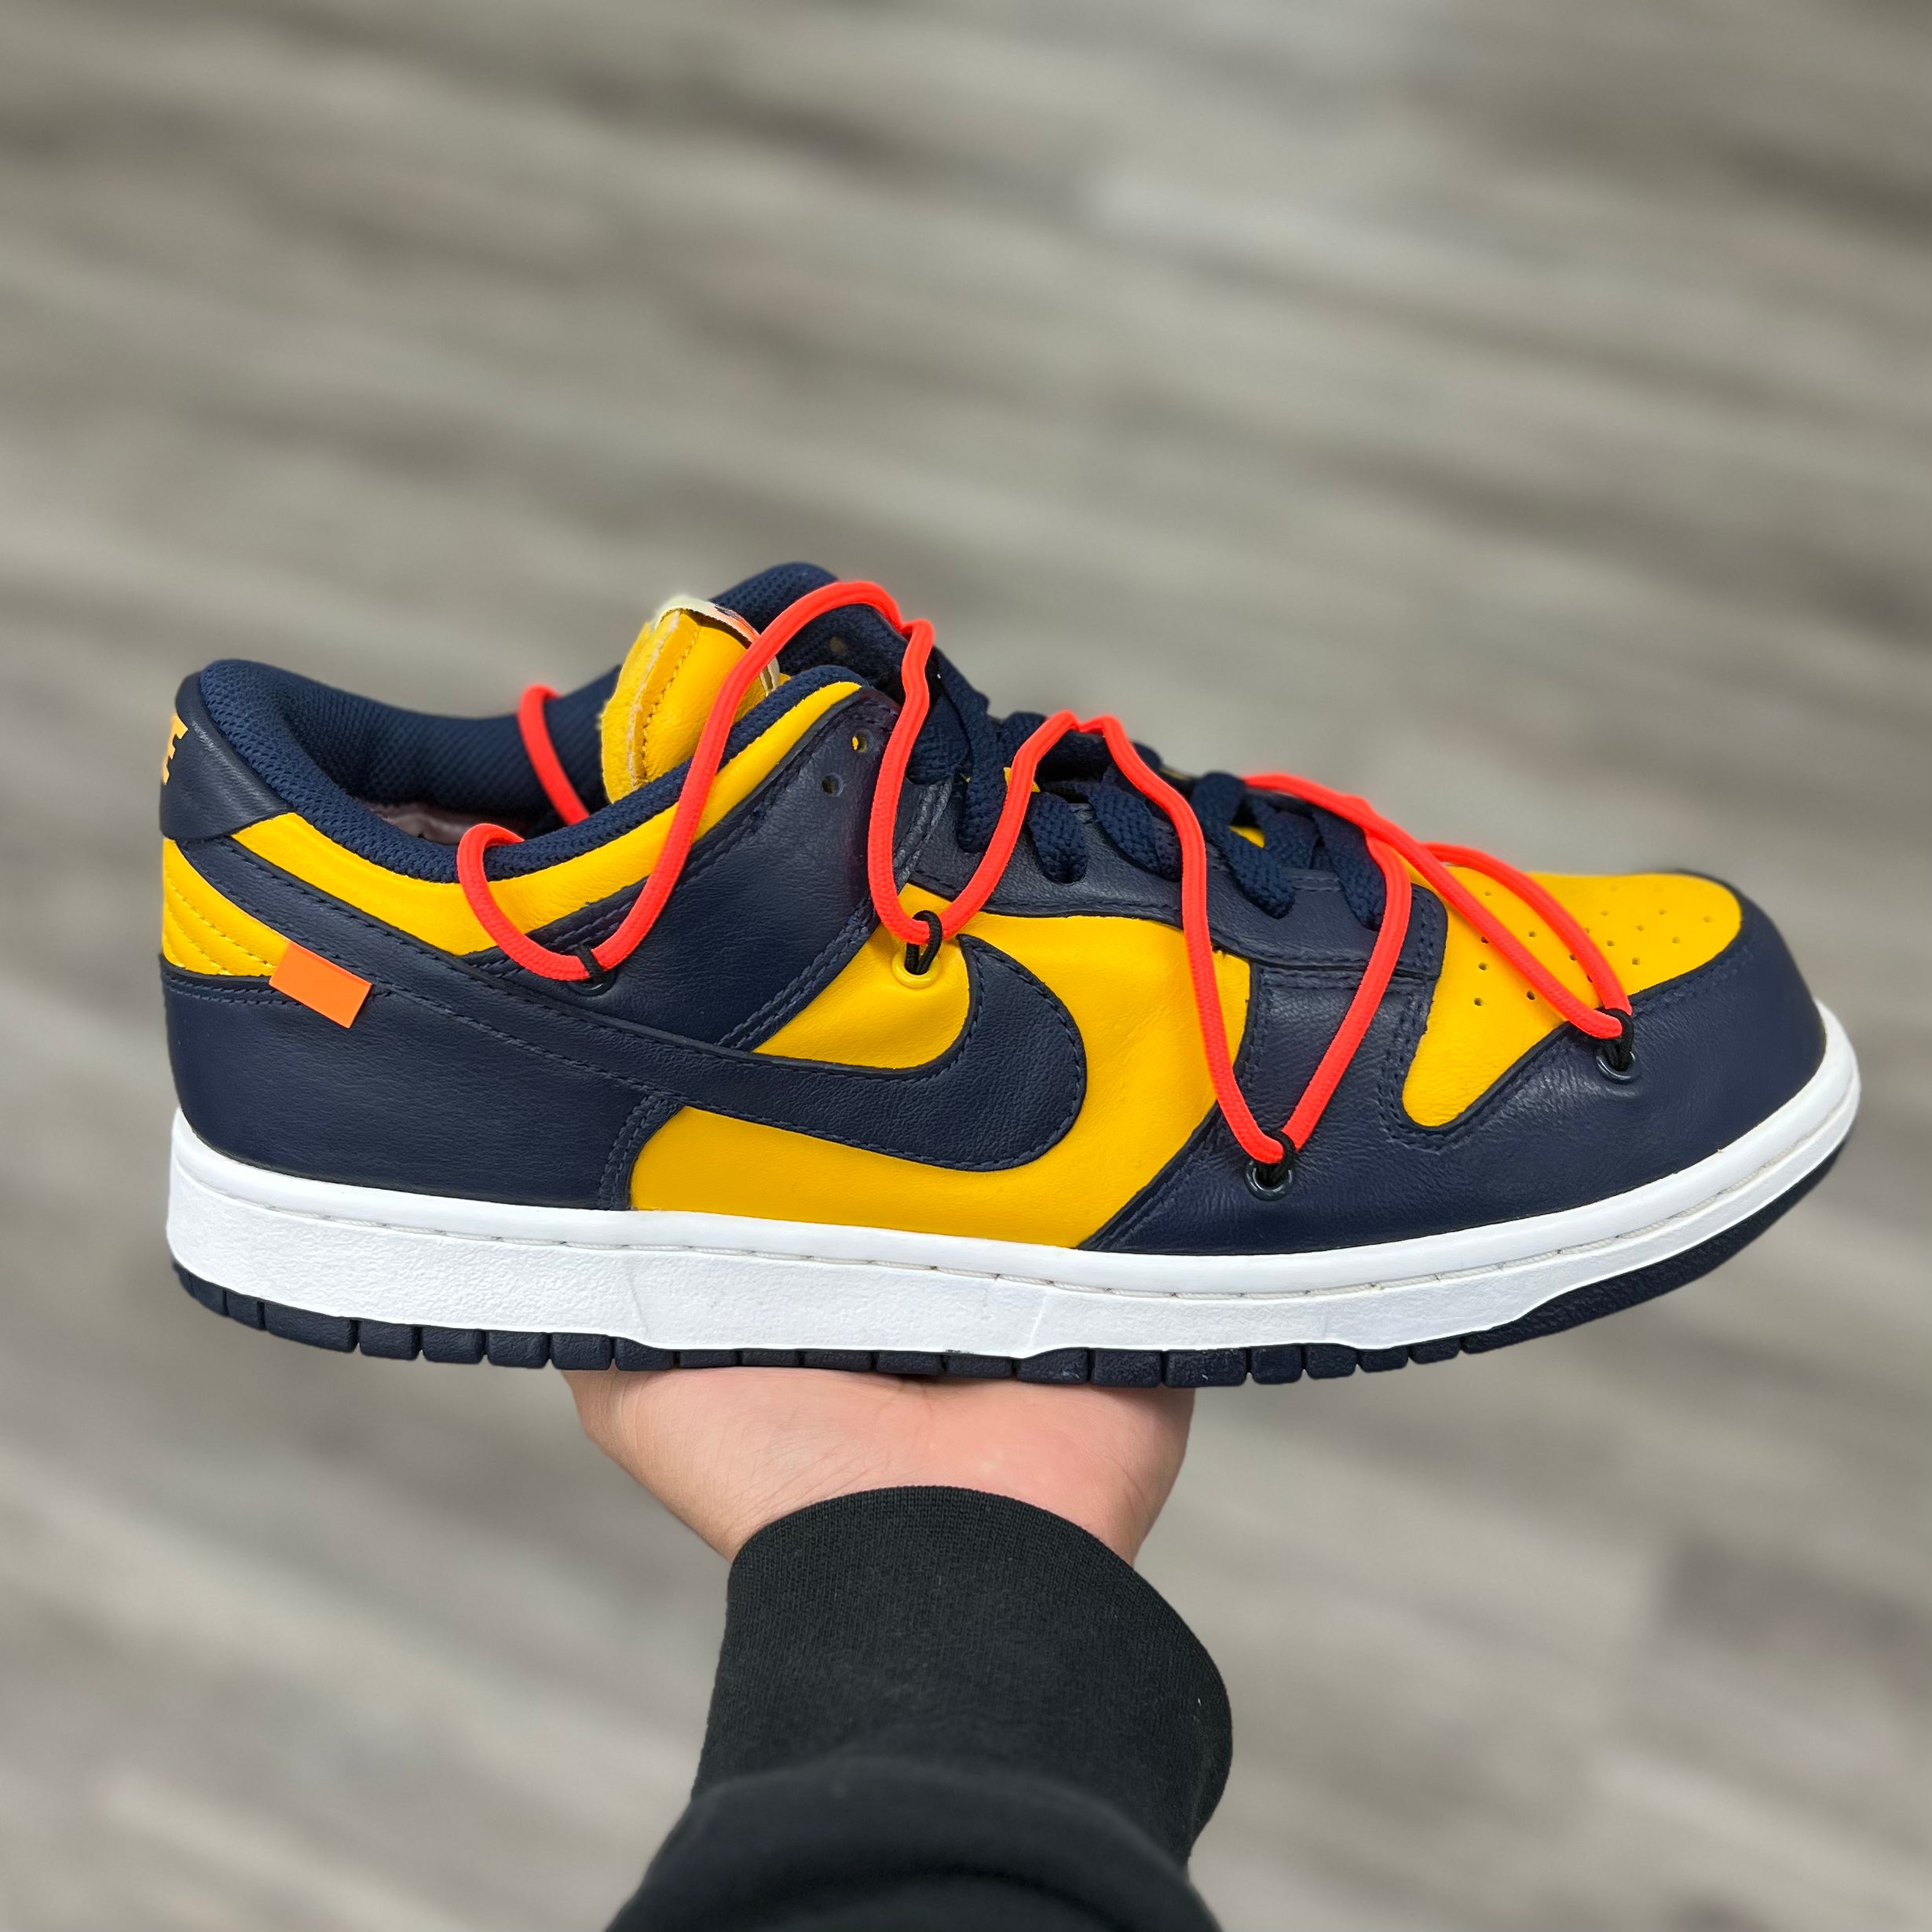 Nike Dunk Low “Off-White University Gold Midnight Navy”